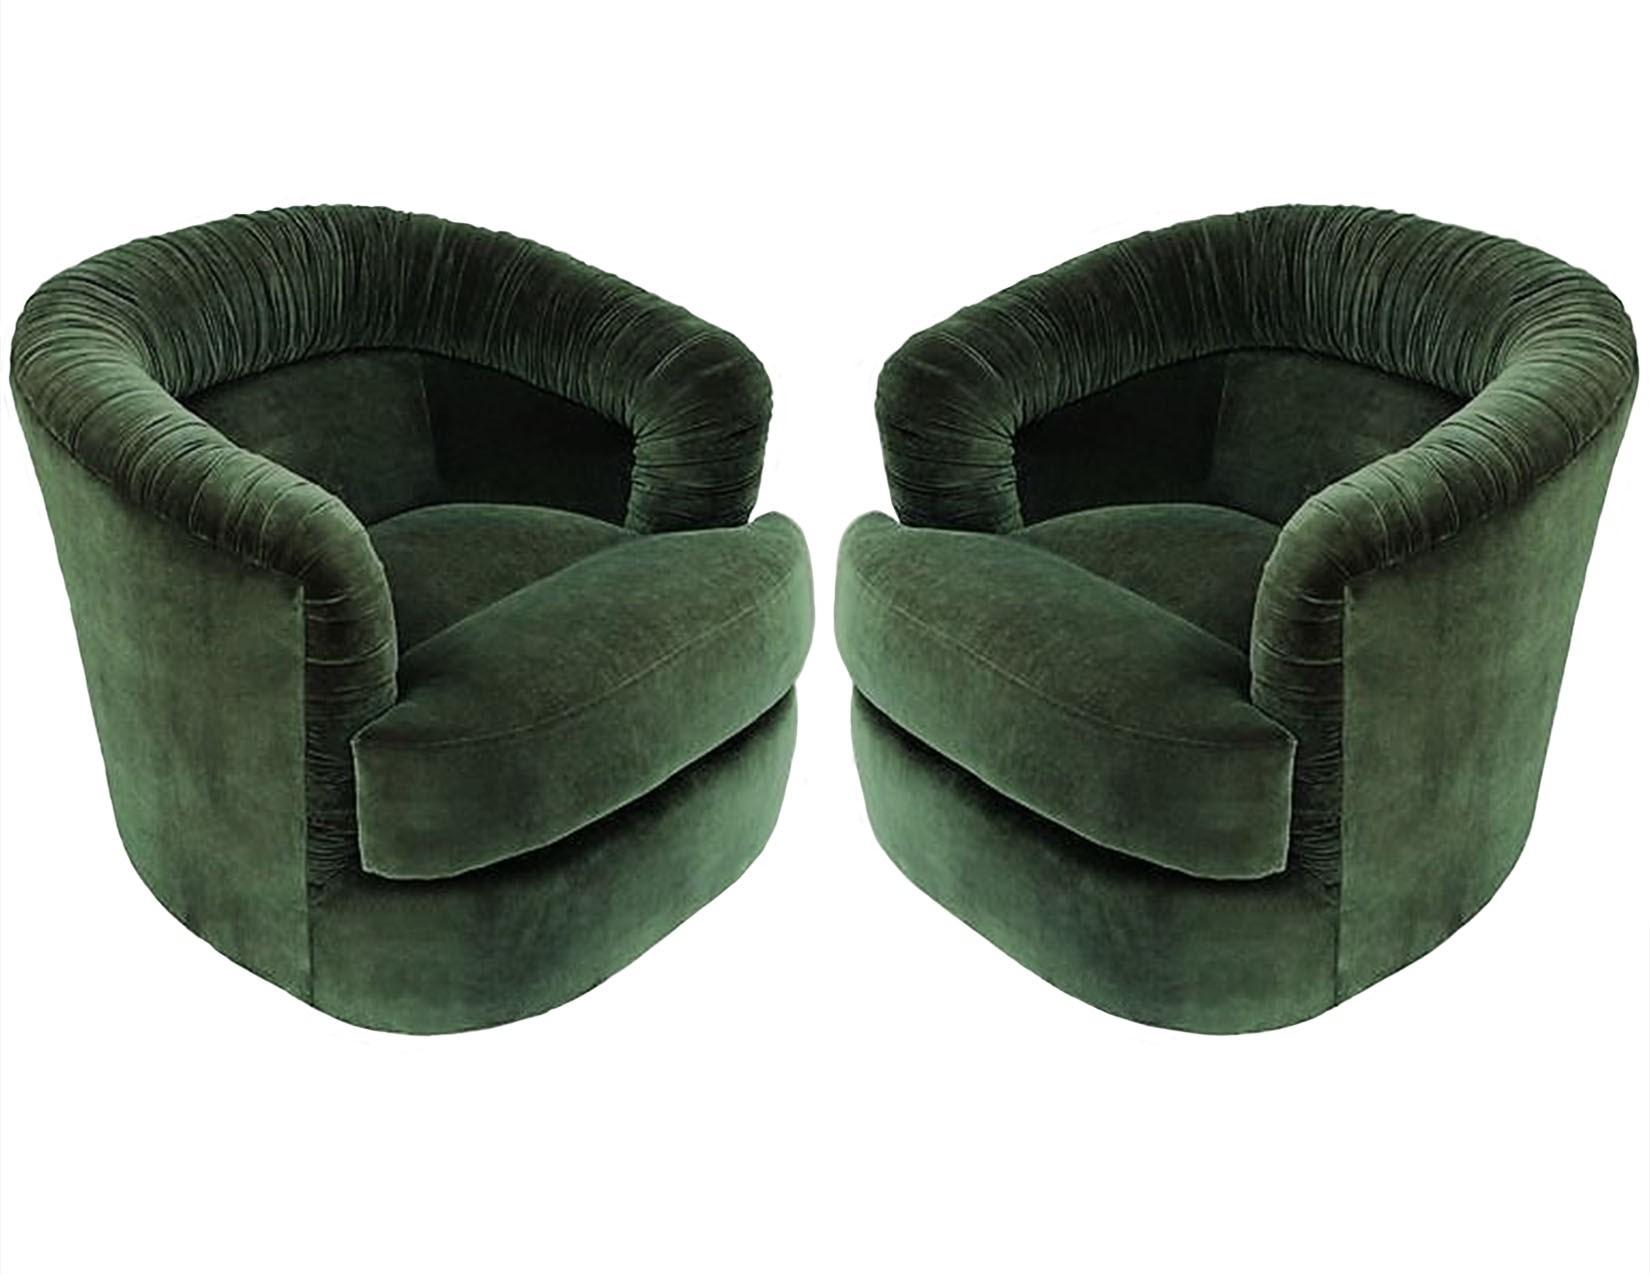 Fabulously unique pair of Mid-Century Modern Milo Baughman style swivel club chairs. These attractive chairs represent the perfect mix of design, function, and comfort. Luxuriously upholstered in soft green colored velvet, these wide and